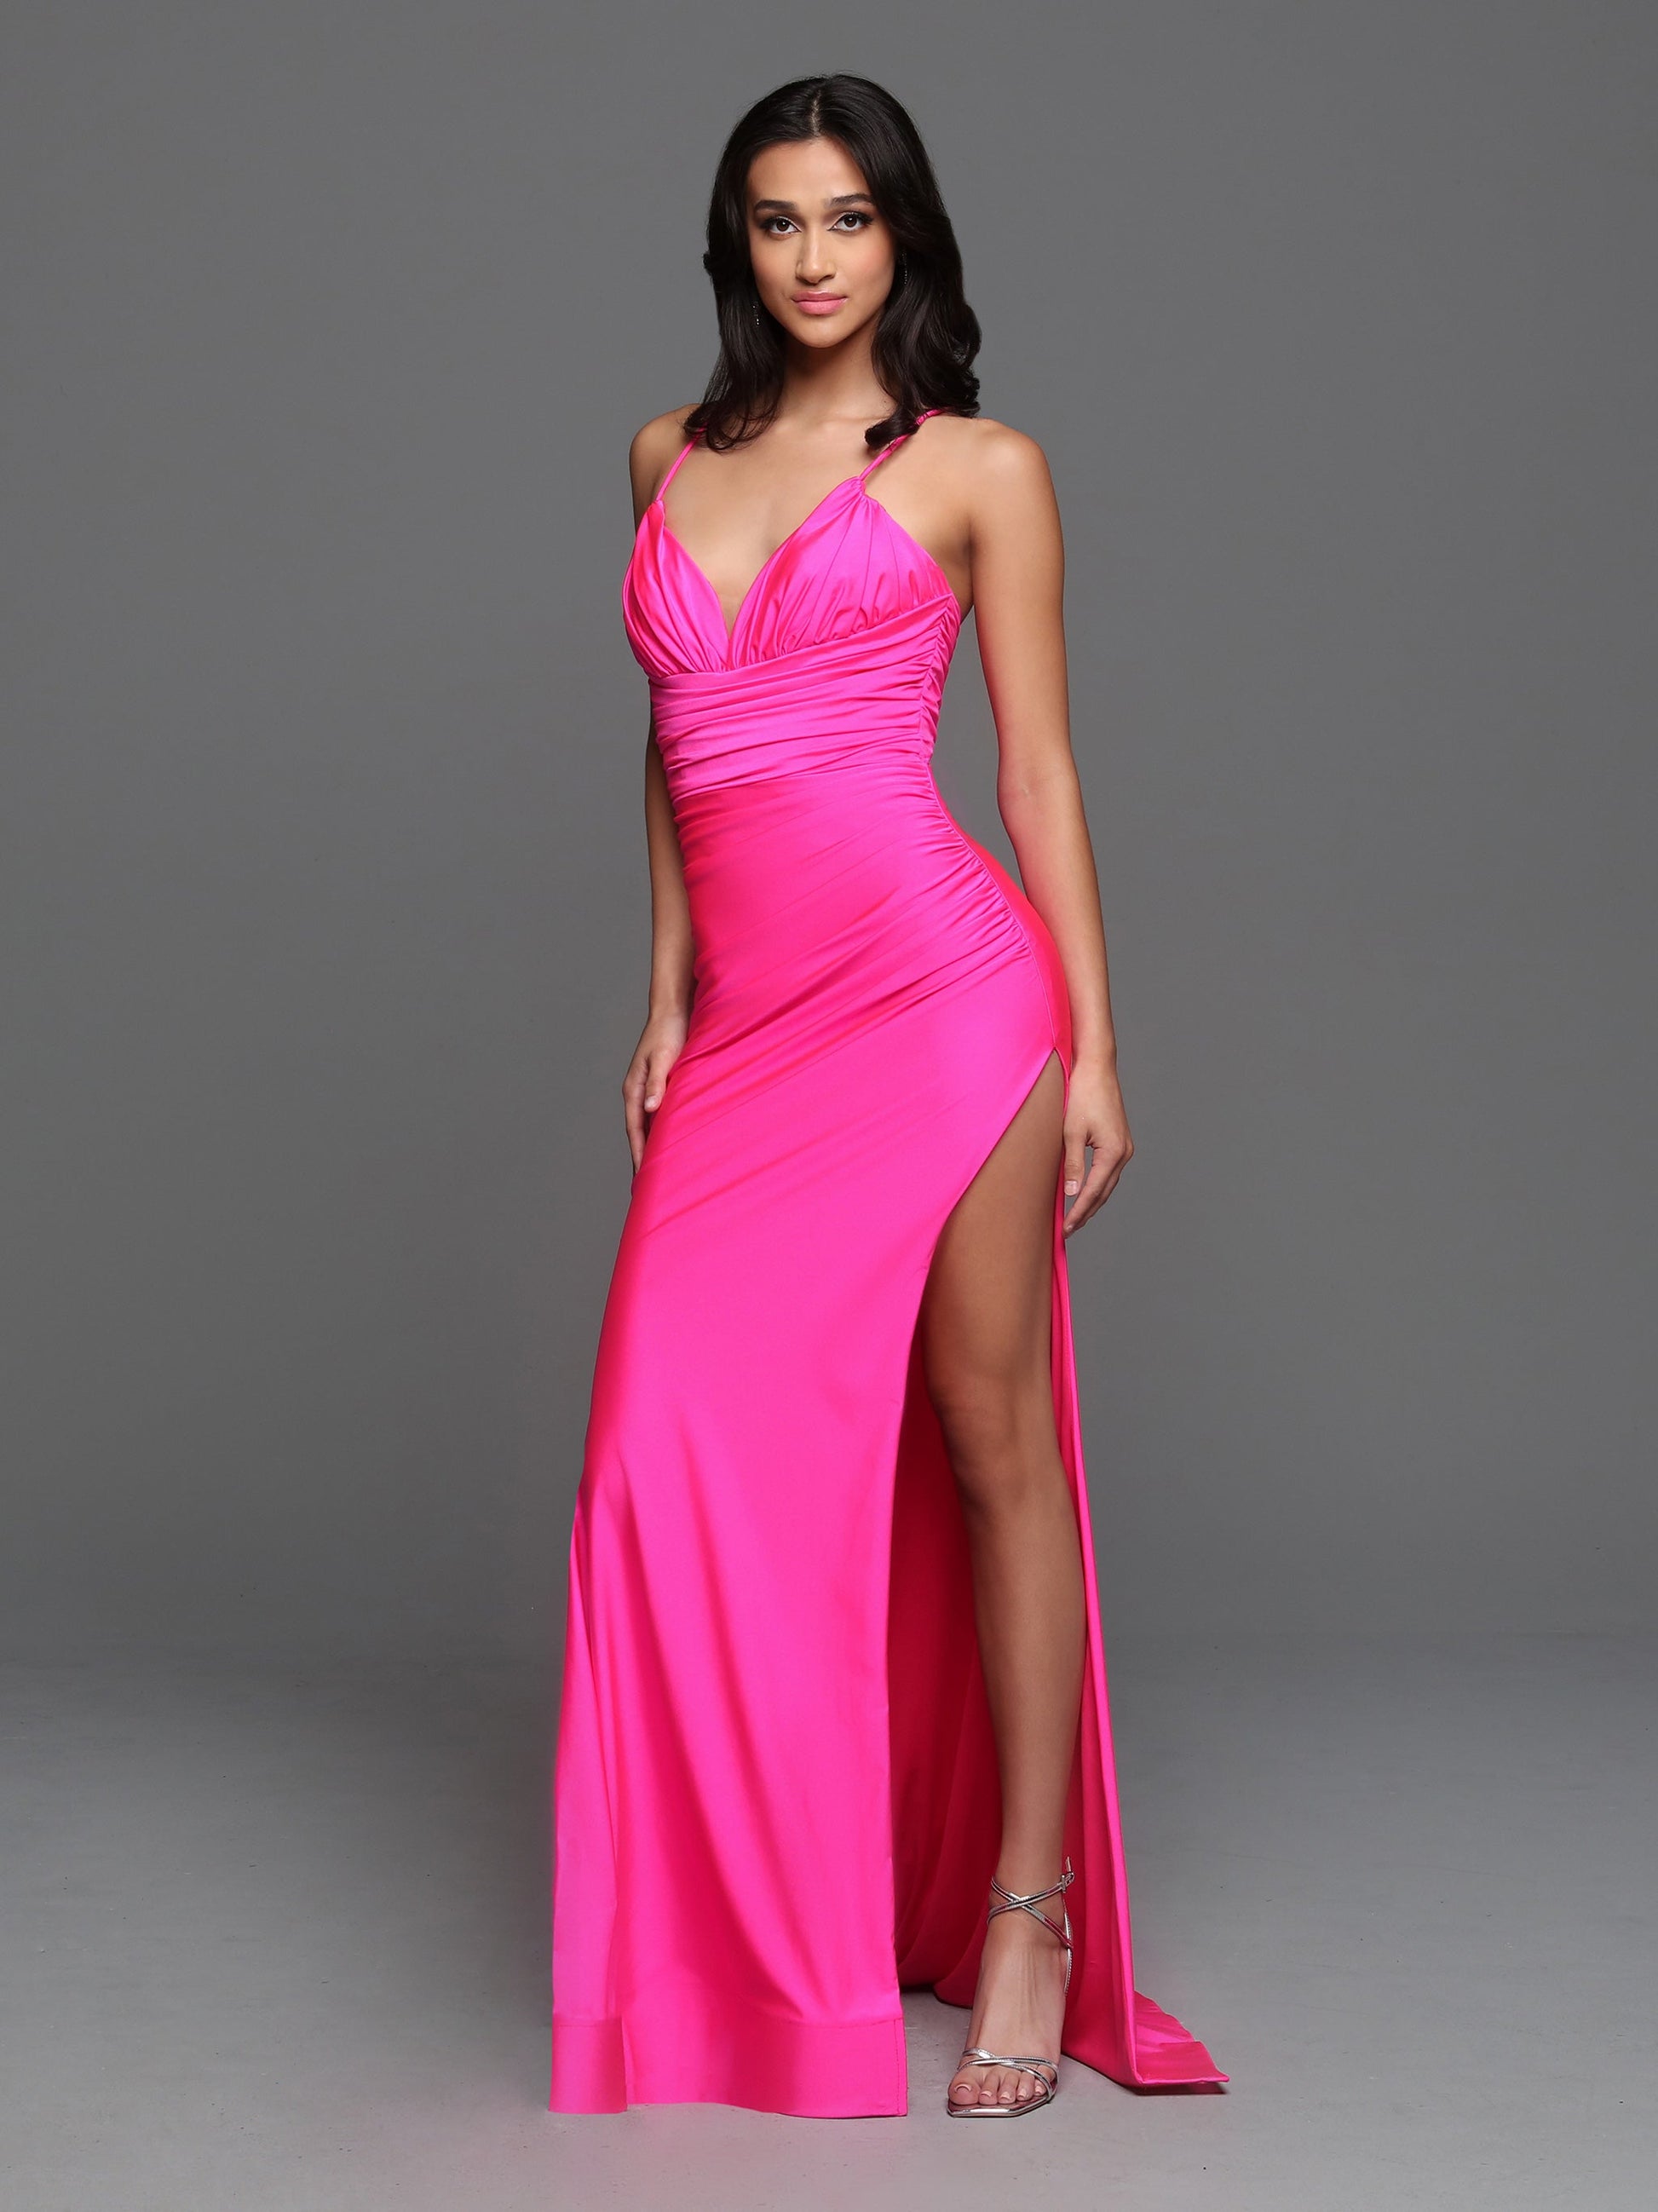 Size: 0, Color: Pink/Pink